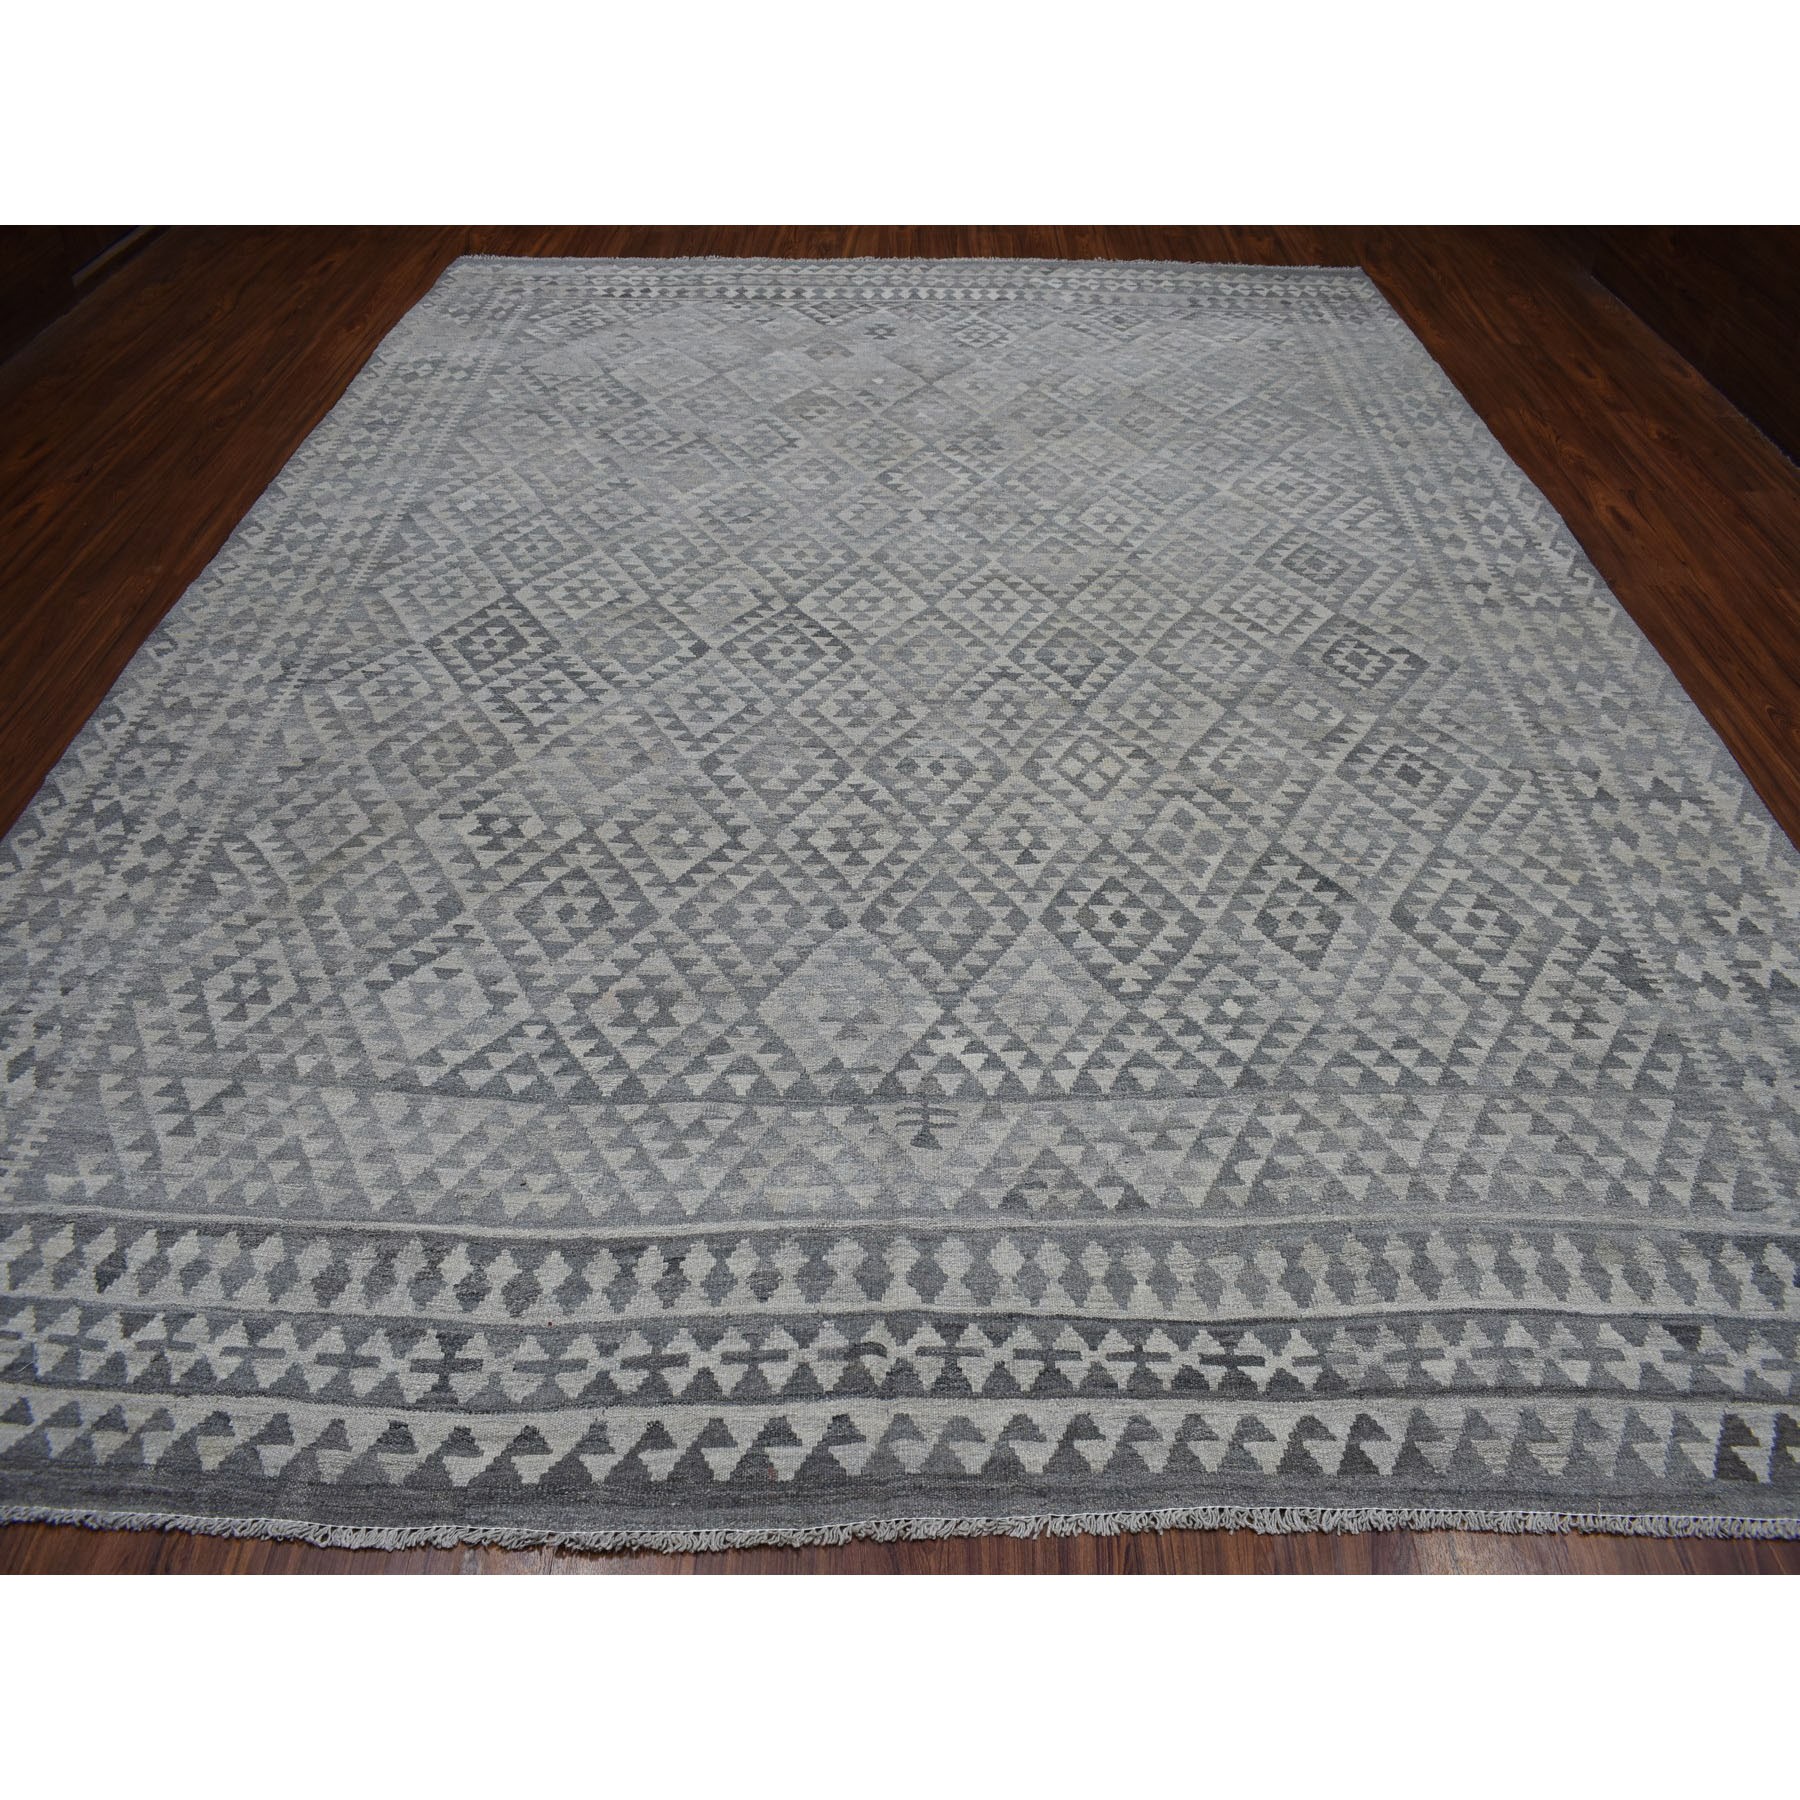 10-2 x12-10  Undyed Natural Wool Afghan Kilim Reversible Hand Woven Oriental Rug 